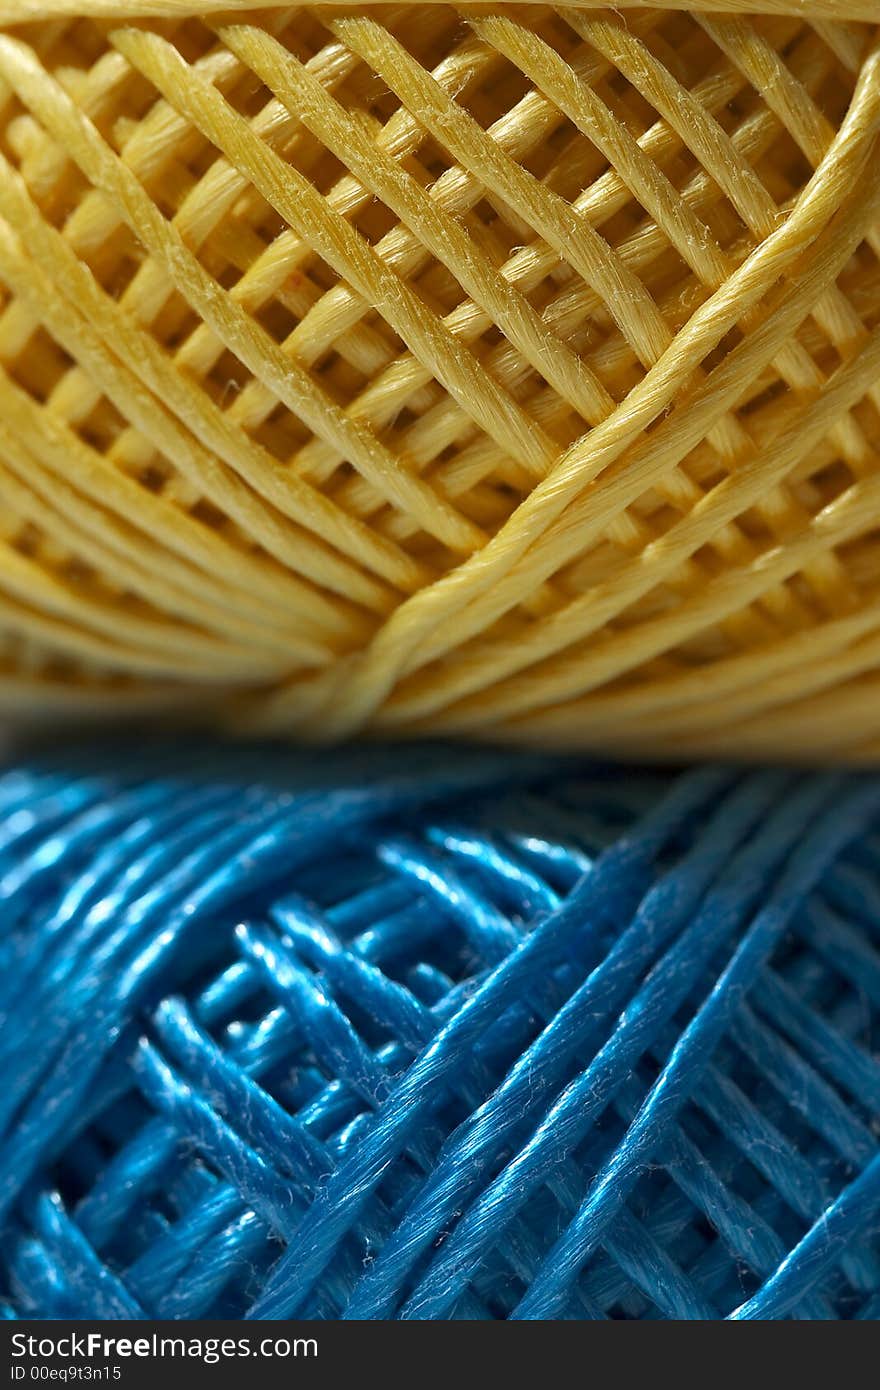 Close up of yellow and blue string